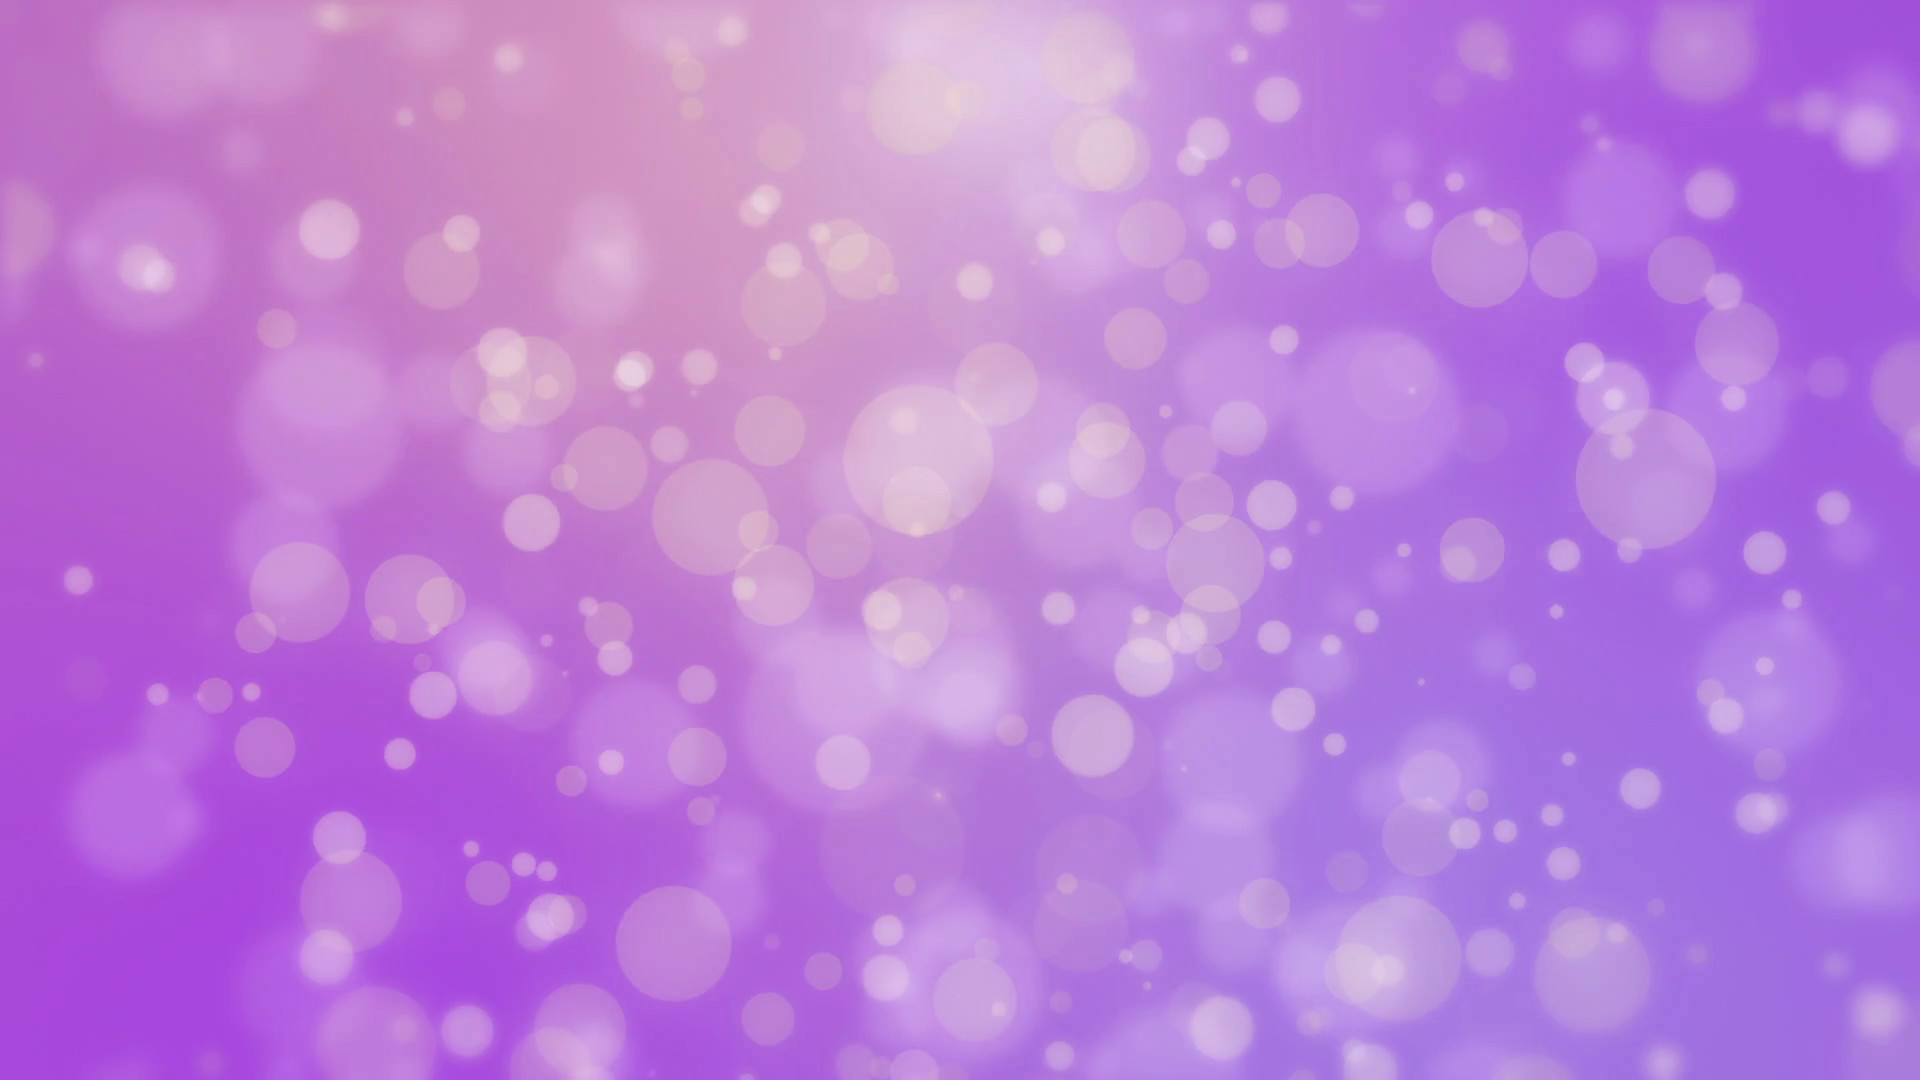 1920x1080 Beautiful purple background with glowing light particles creating a bokeh  effect Motion Background - VideoBlocks